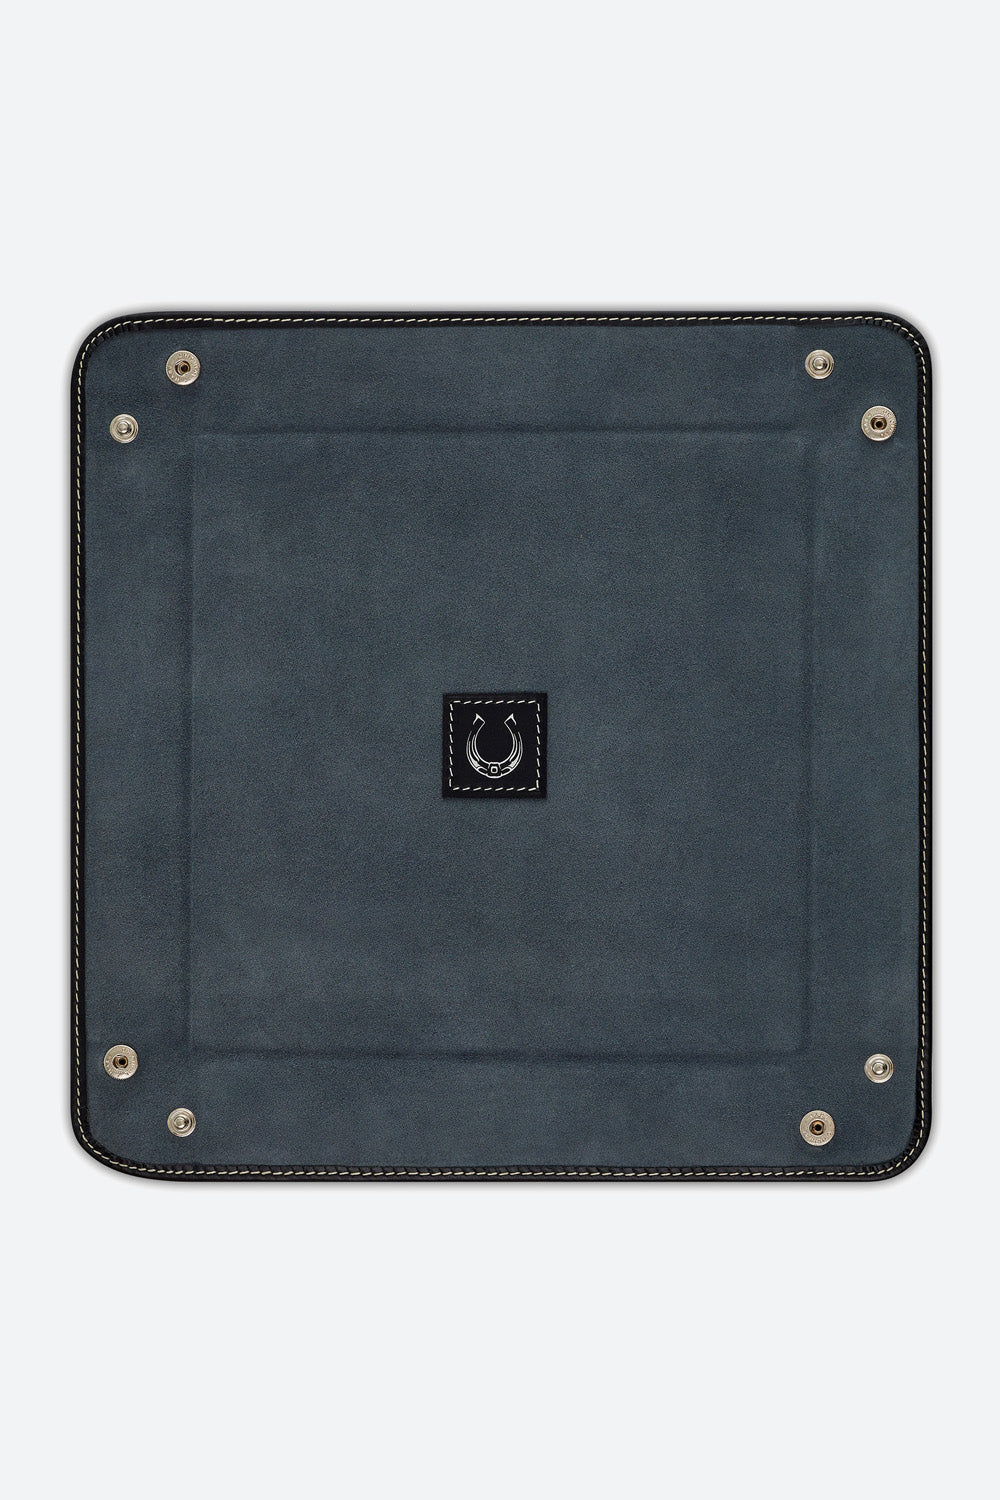 Large Square Leather Valet Tray in Black